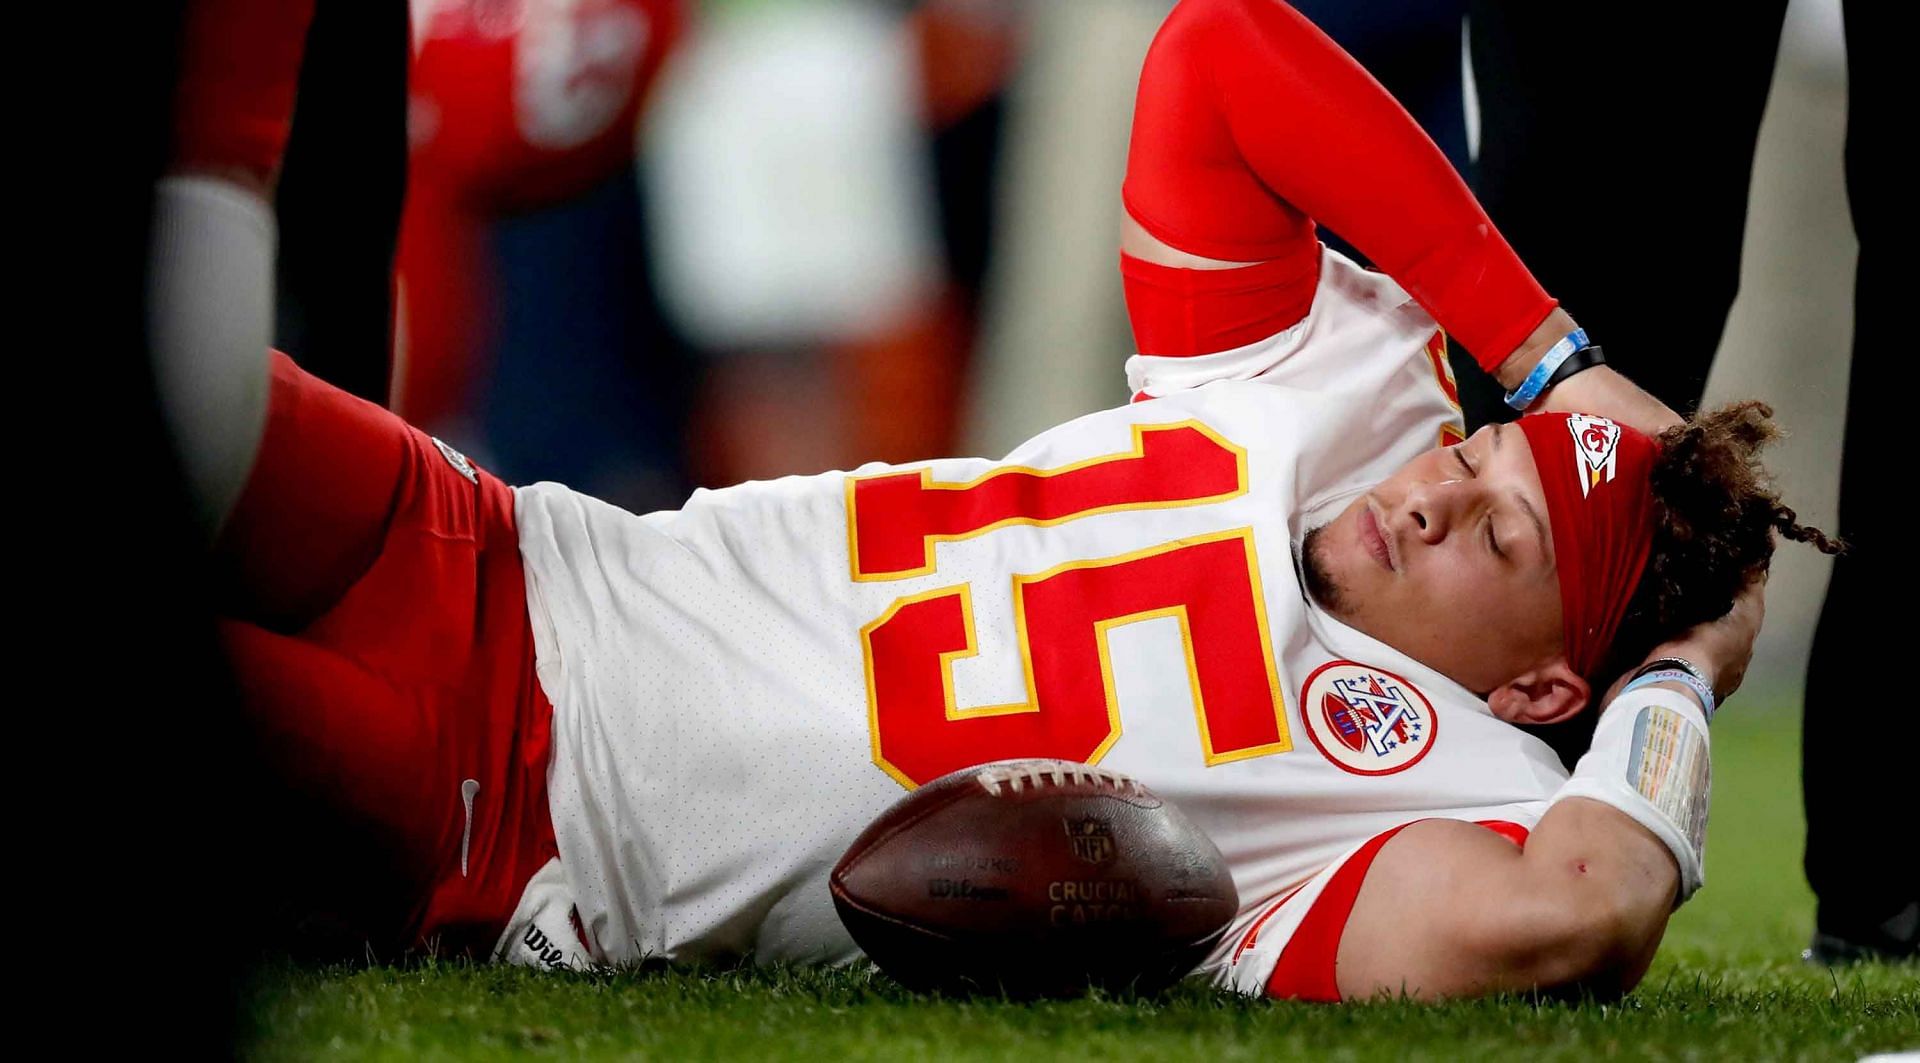 Patrick Mahomes suffered a brutal leg injury after appearing on the Madden cover